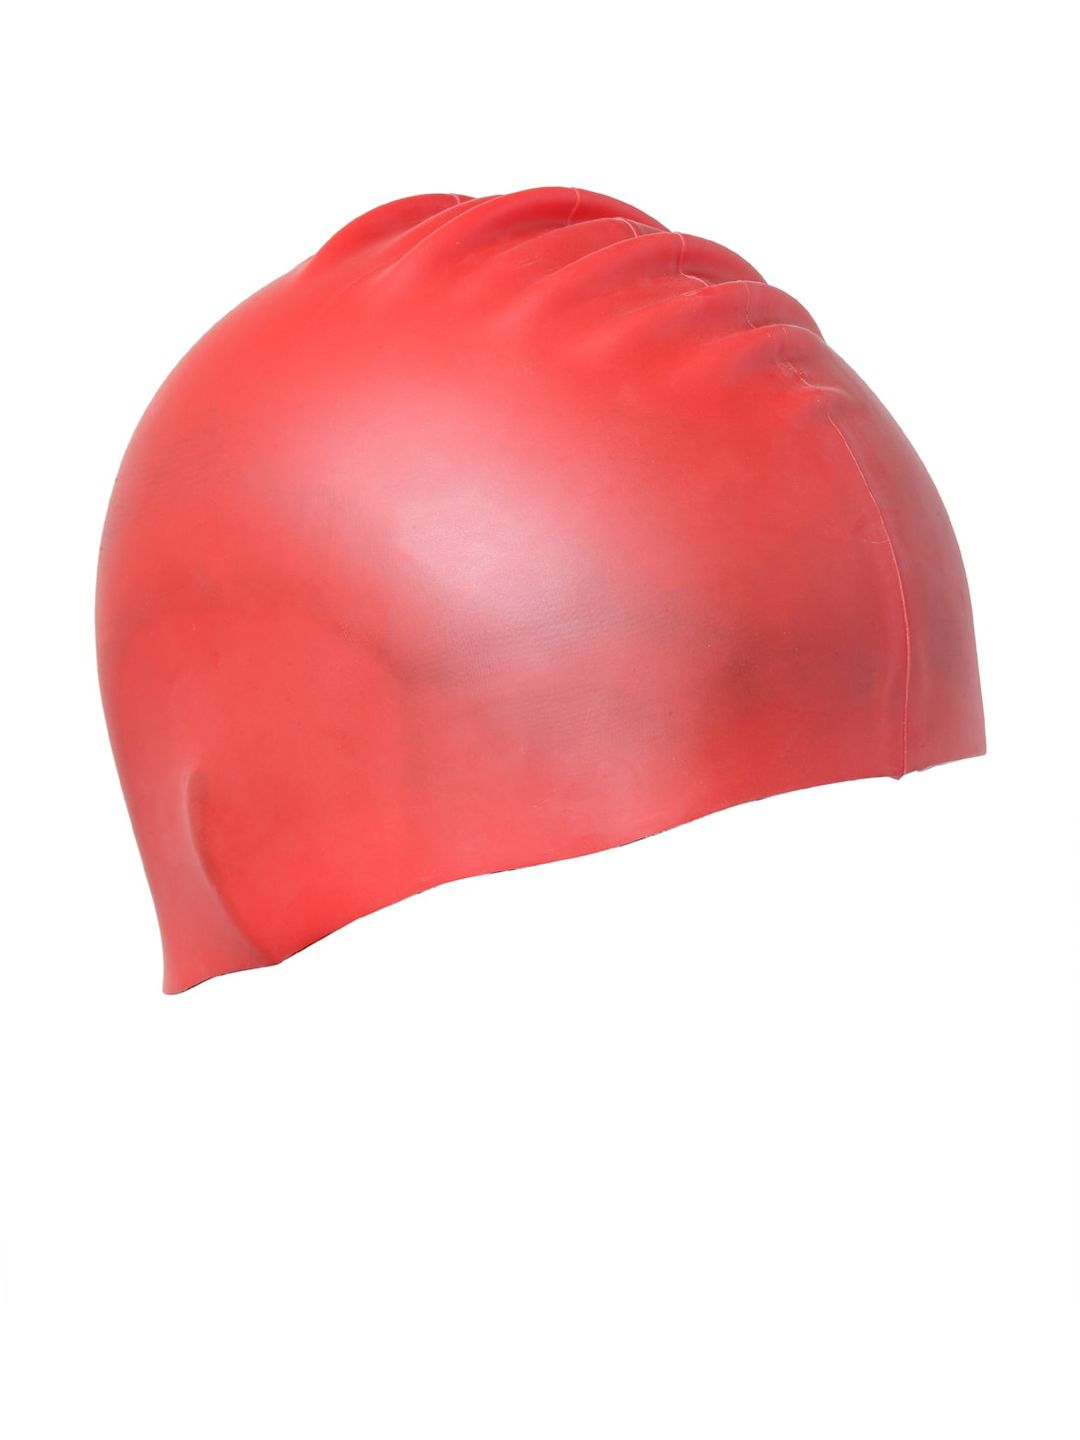 CUKOO Women Red Solid Comfort-Fit Swimming Cap Price in India